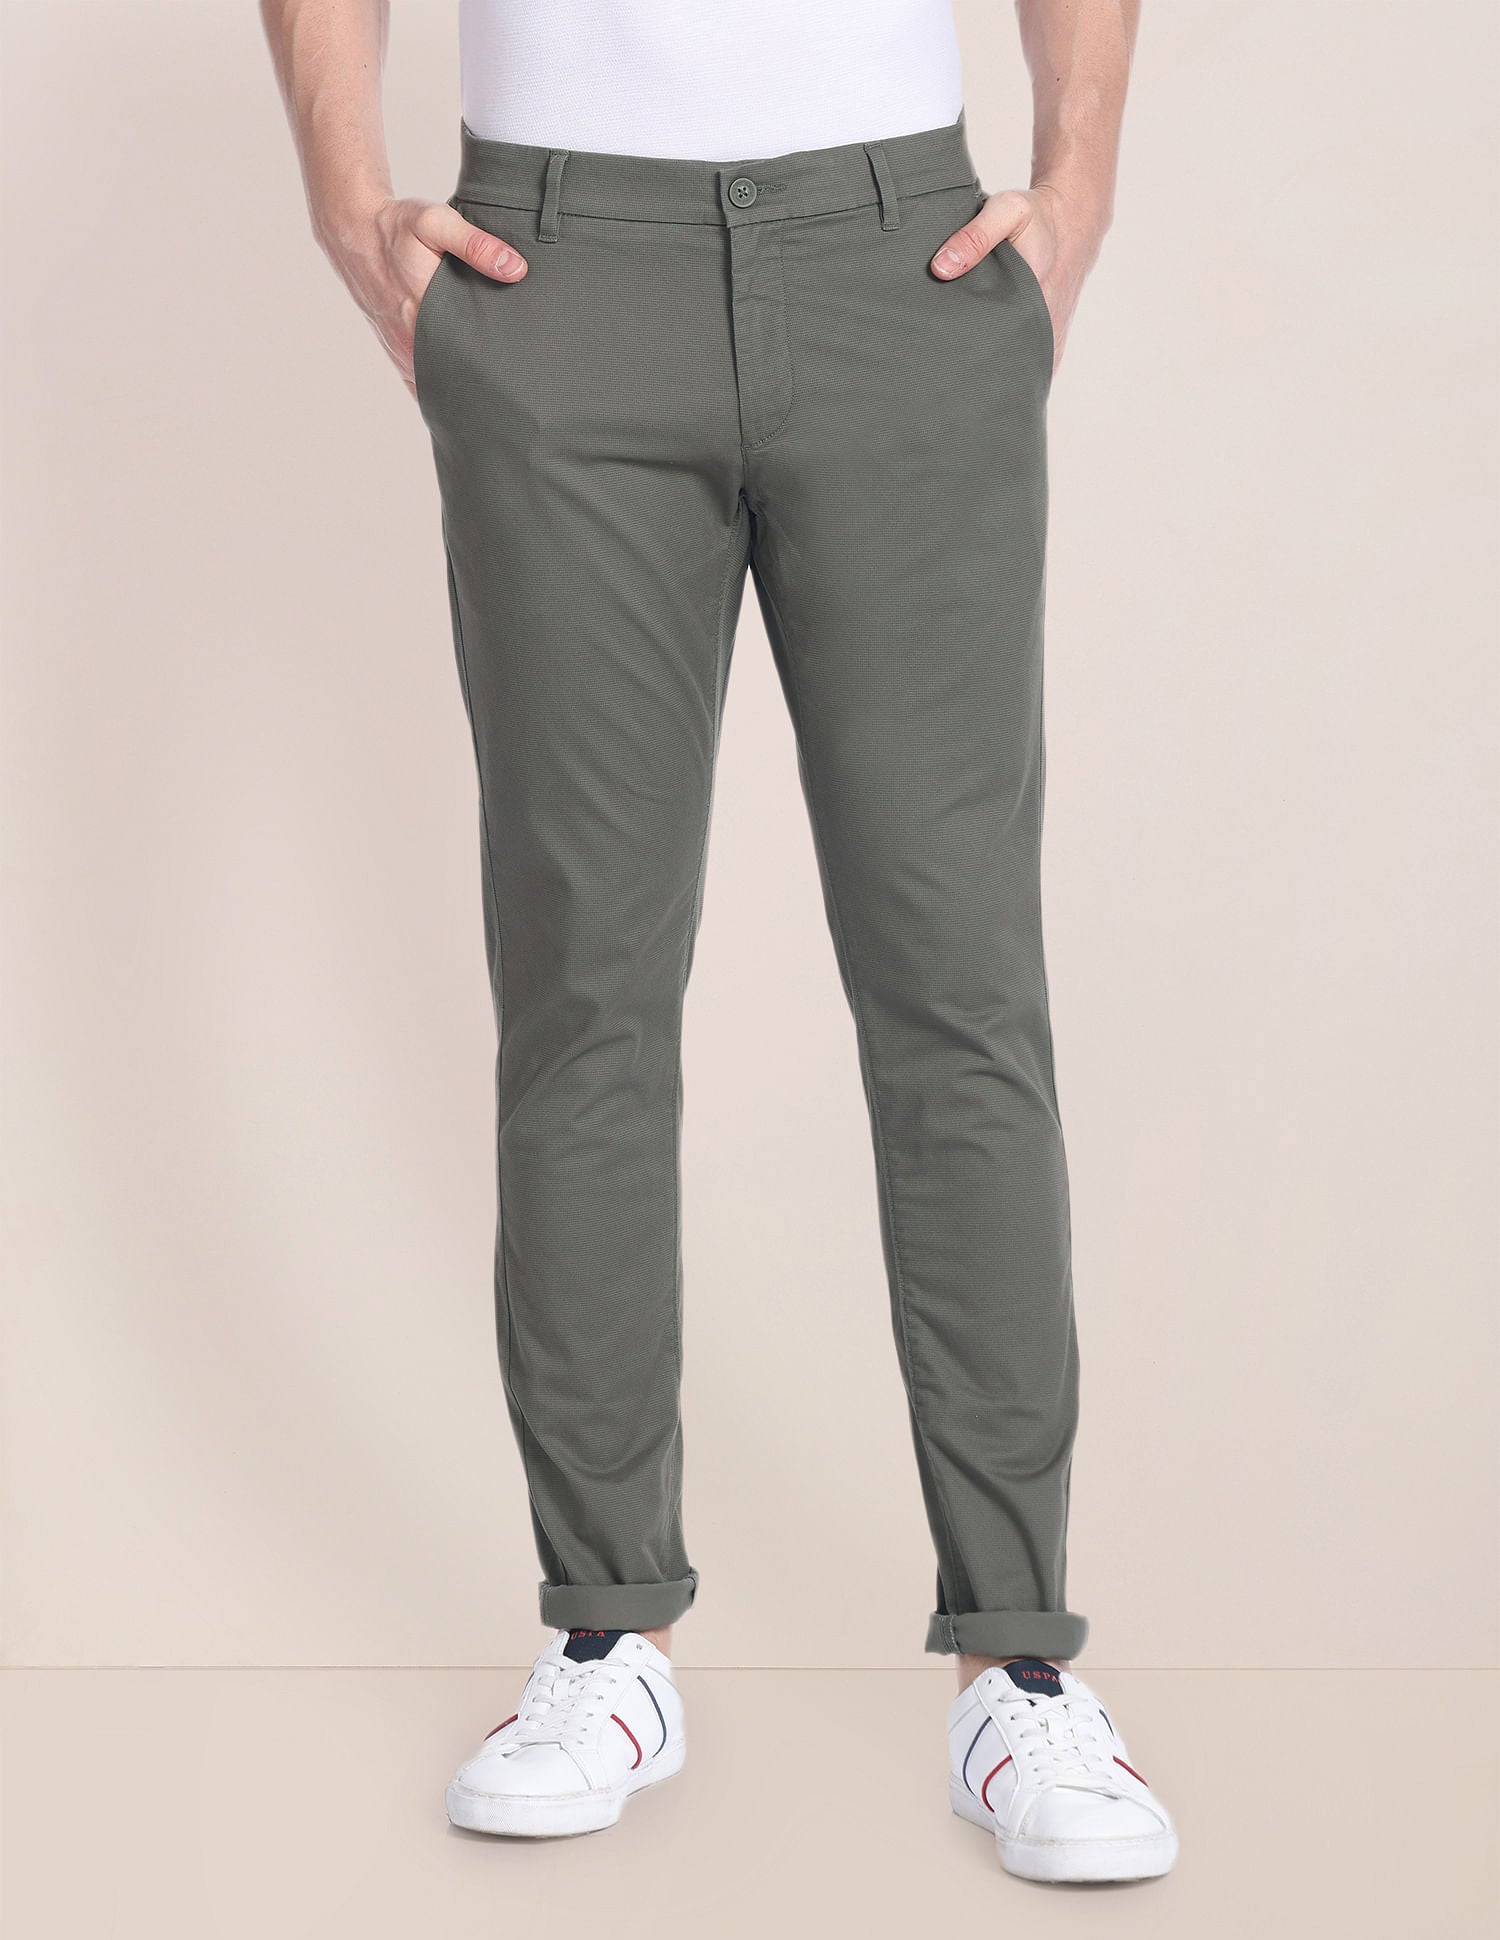 U S Polo Assn Grey Track Pant #I672 at Rs 899.00 | Track Pant | ID:  2852587022048